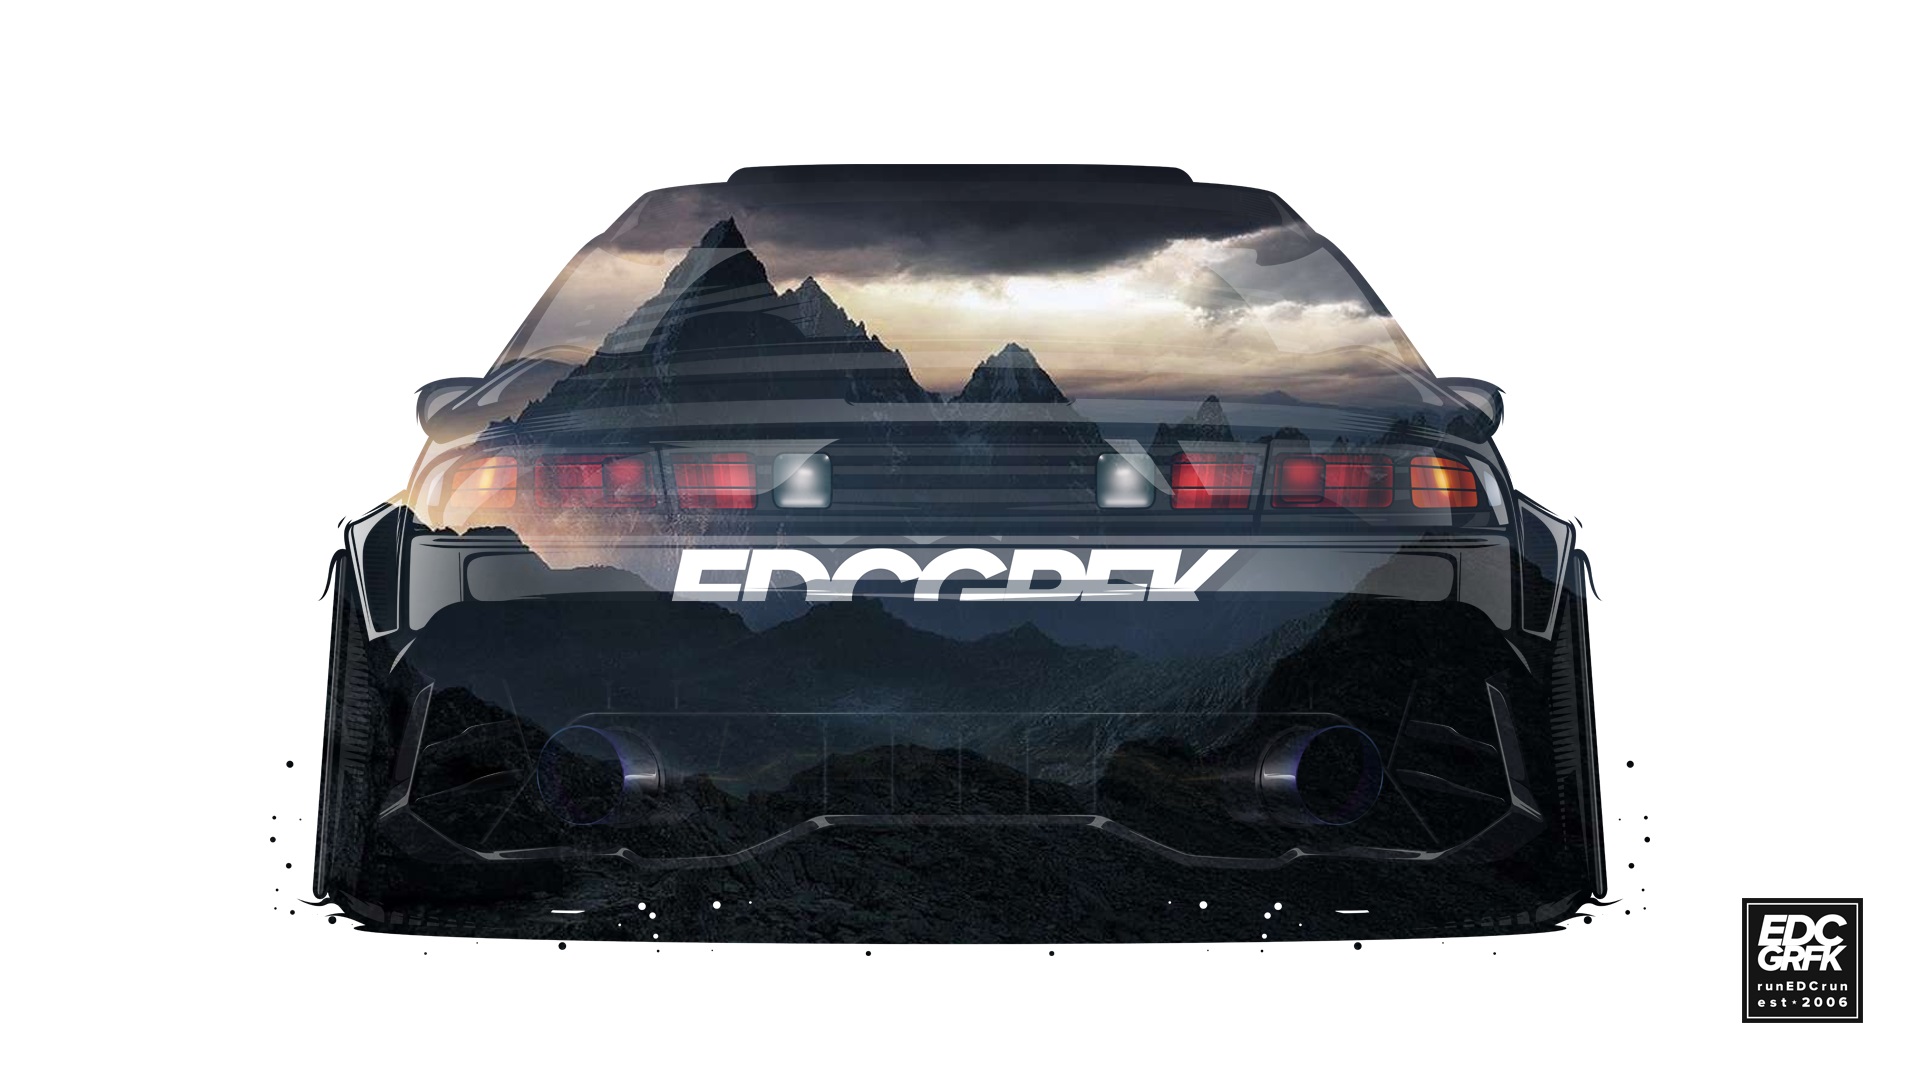 EDC Graphics Nissan Silvia S14 Nissan Nissan Render Japanese Cars JDM Mountains Rear View 1920x1080